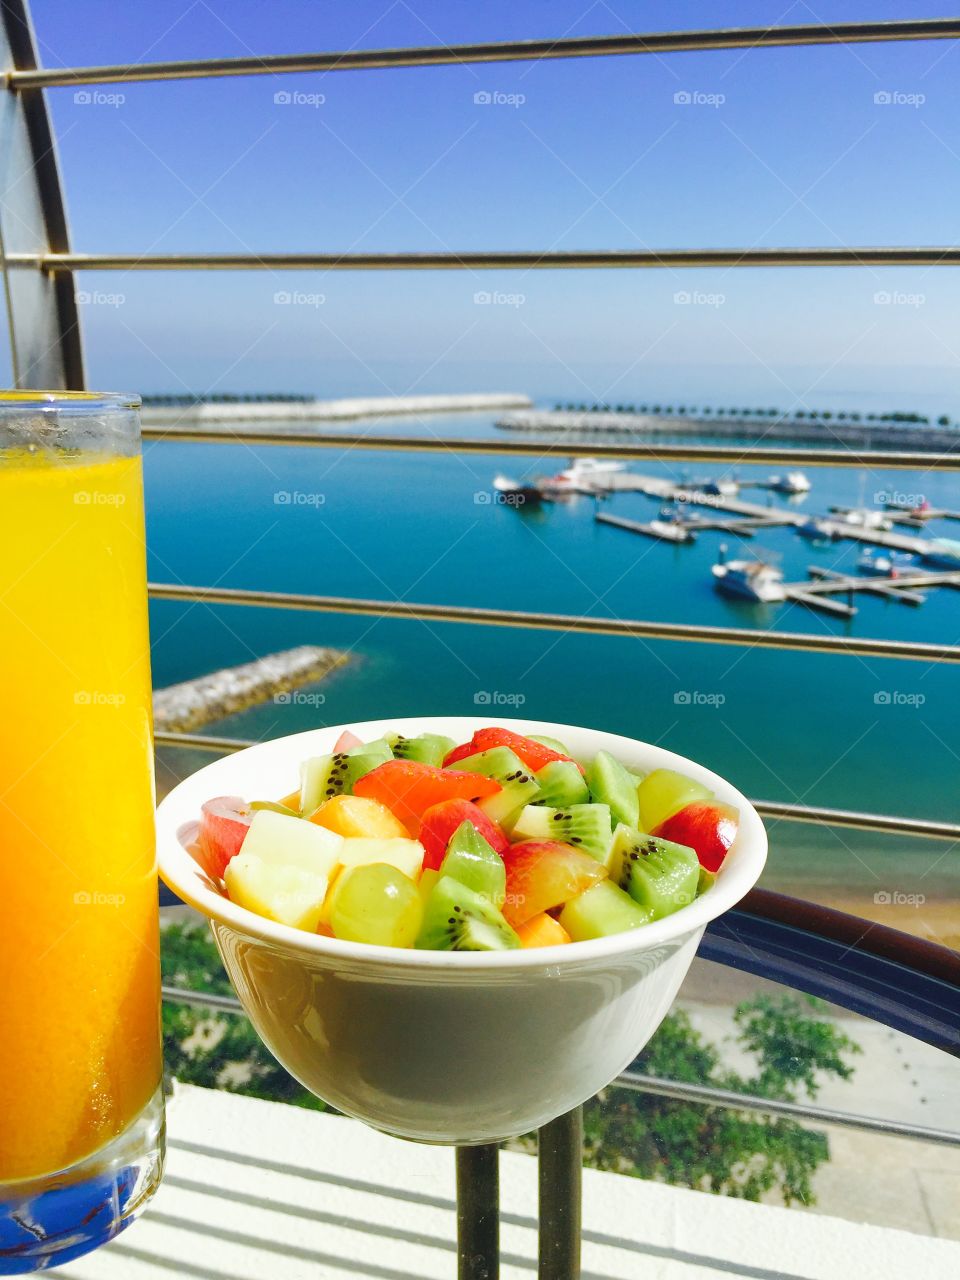 Fruit bowl and orange juice healthy breakfast overlooking the Oman harbour boats and sea 